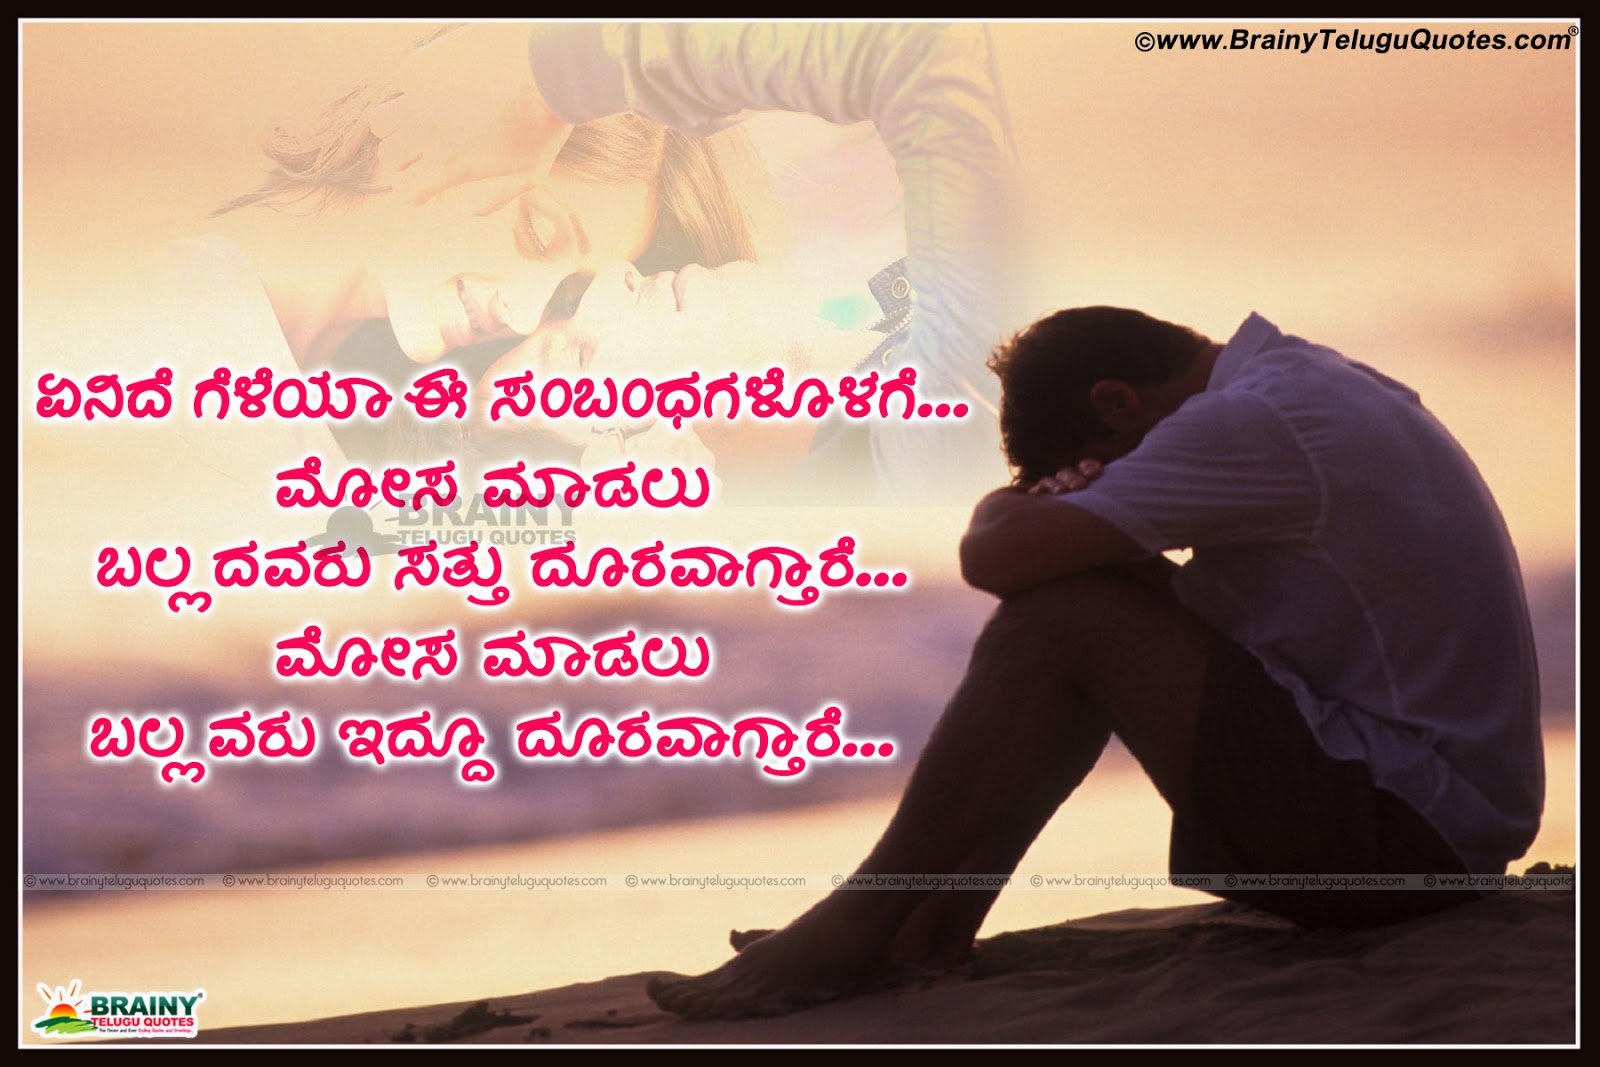 Kannada Sad Love Quotes Kannada love failure quotes and miss you images